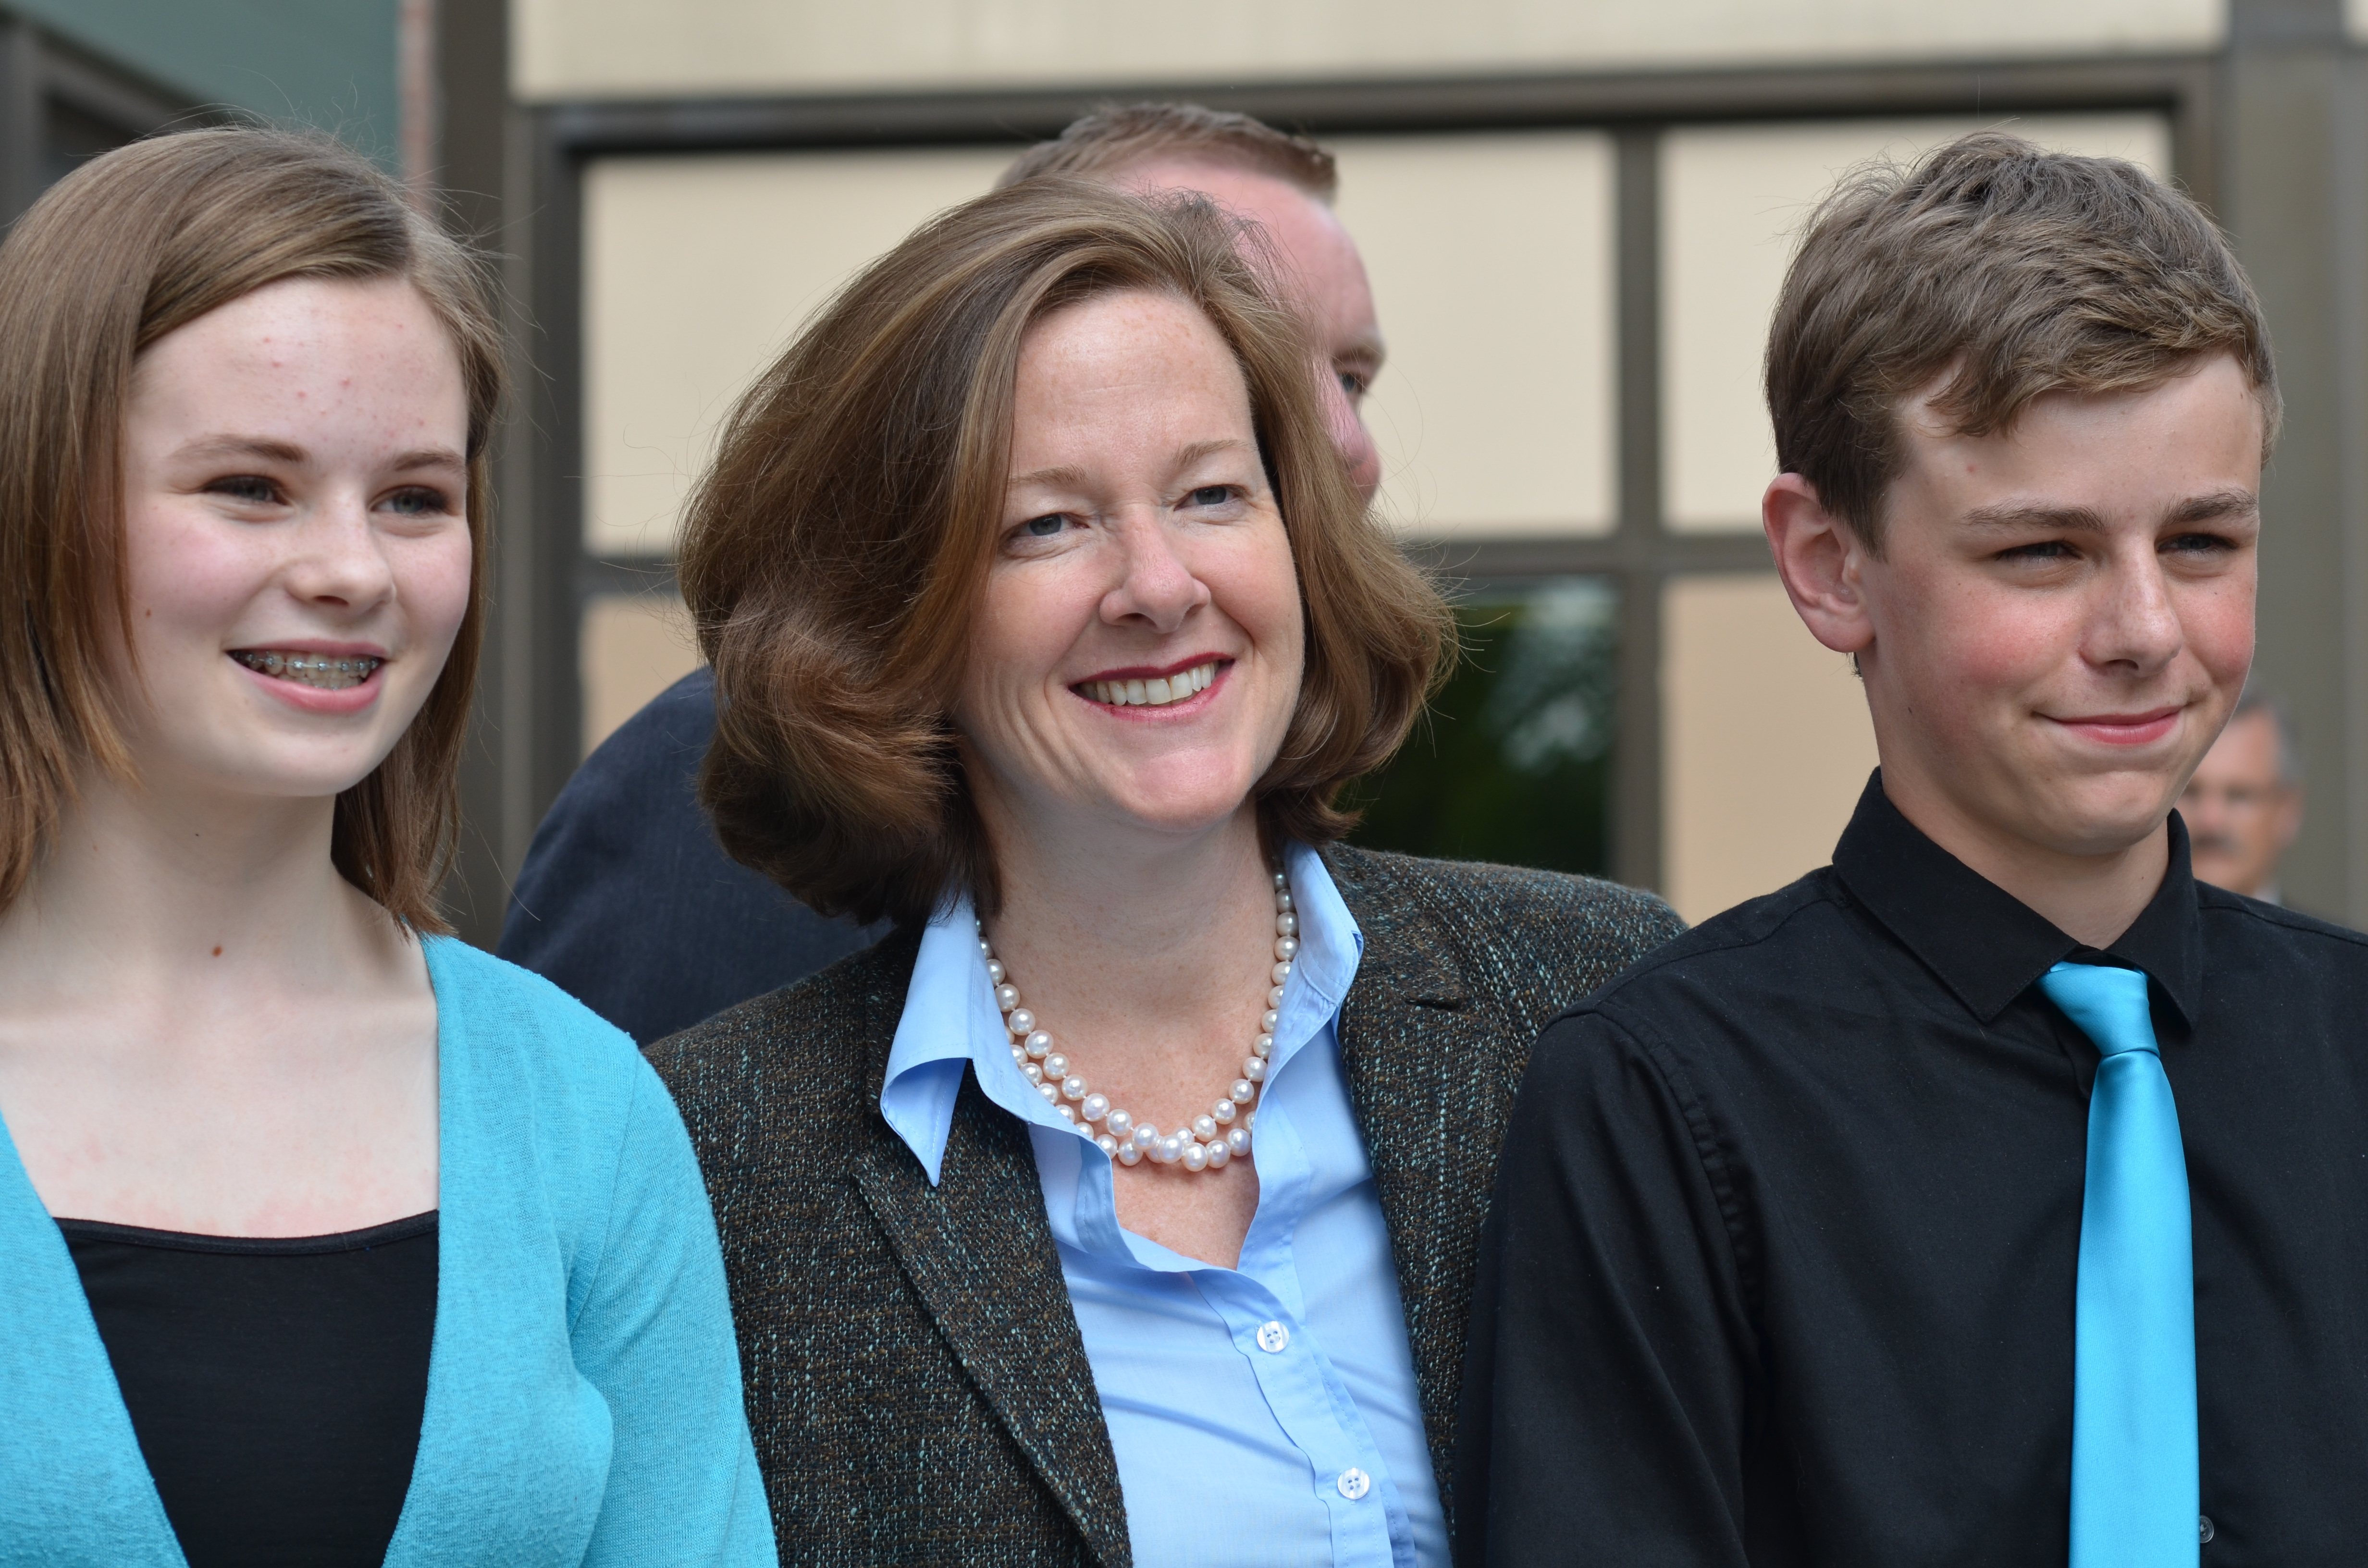 PROUD PREMIER - Premier Alison Redford stands with two of the four students